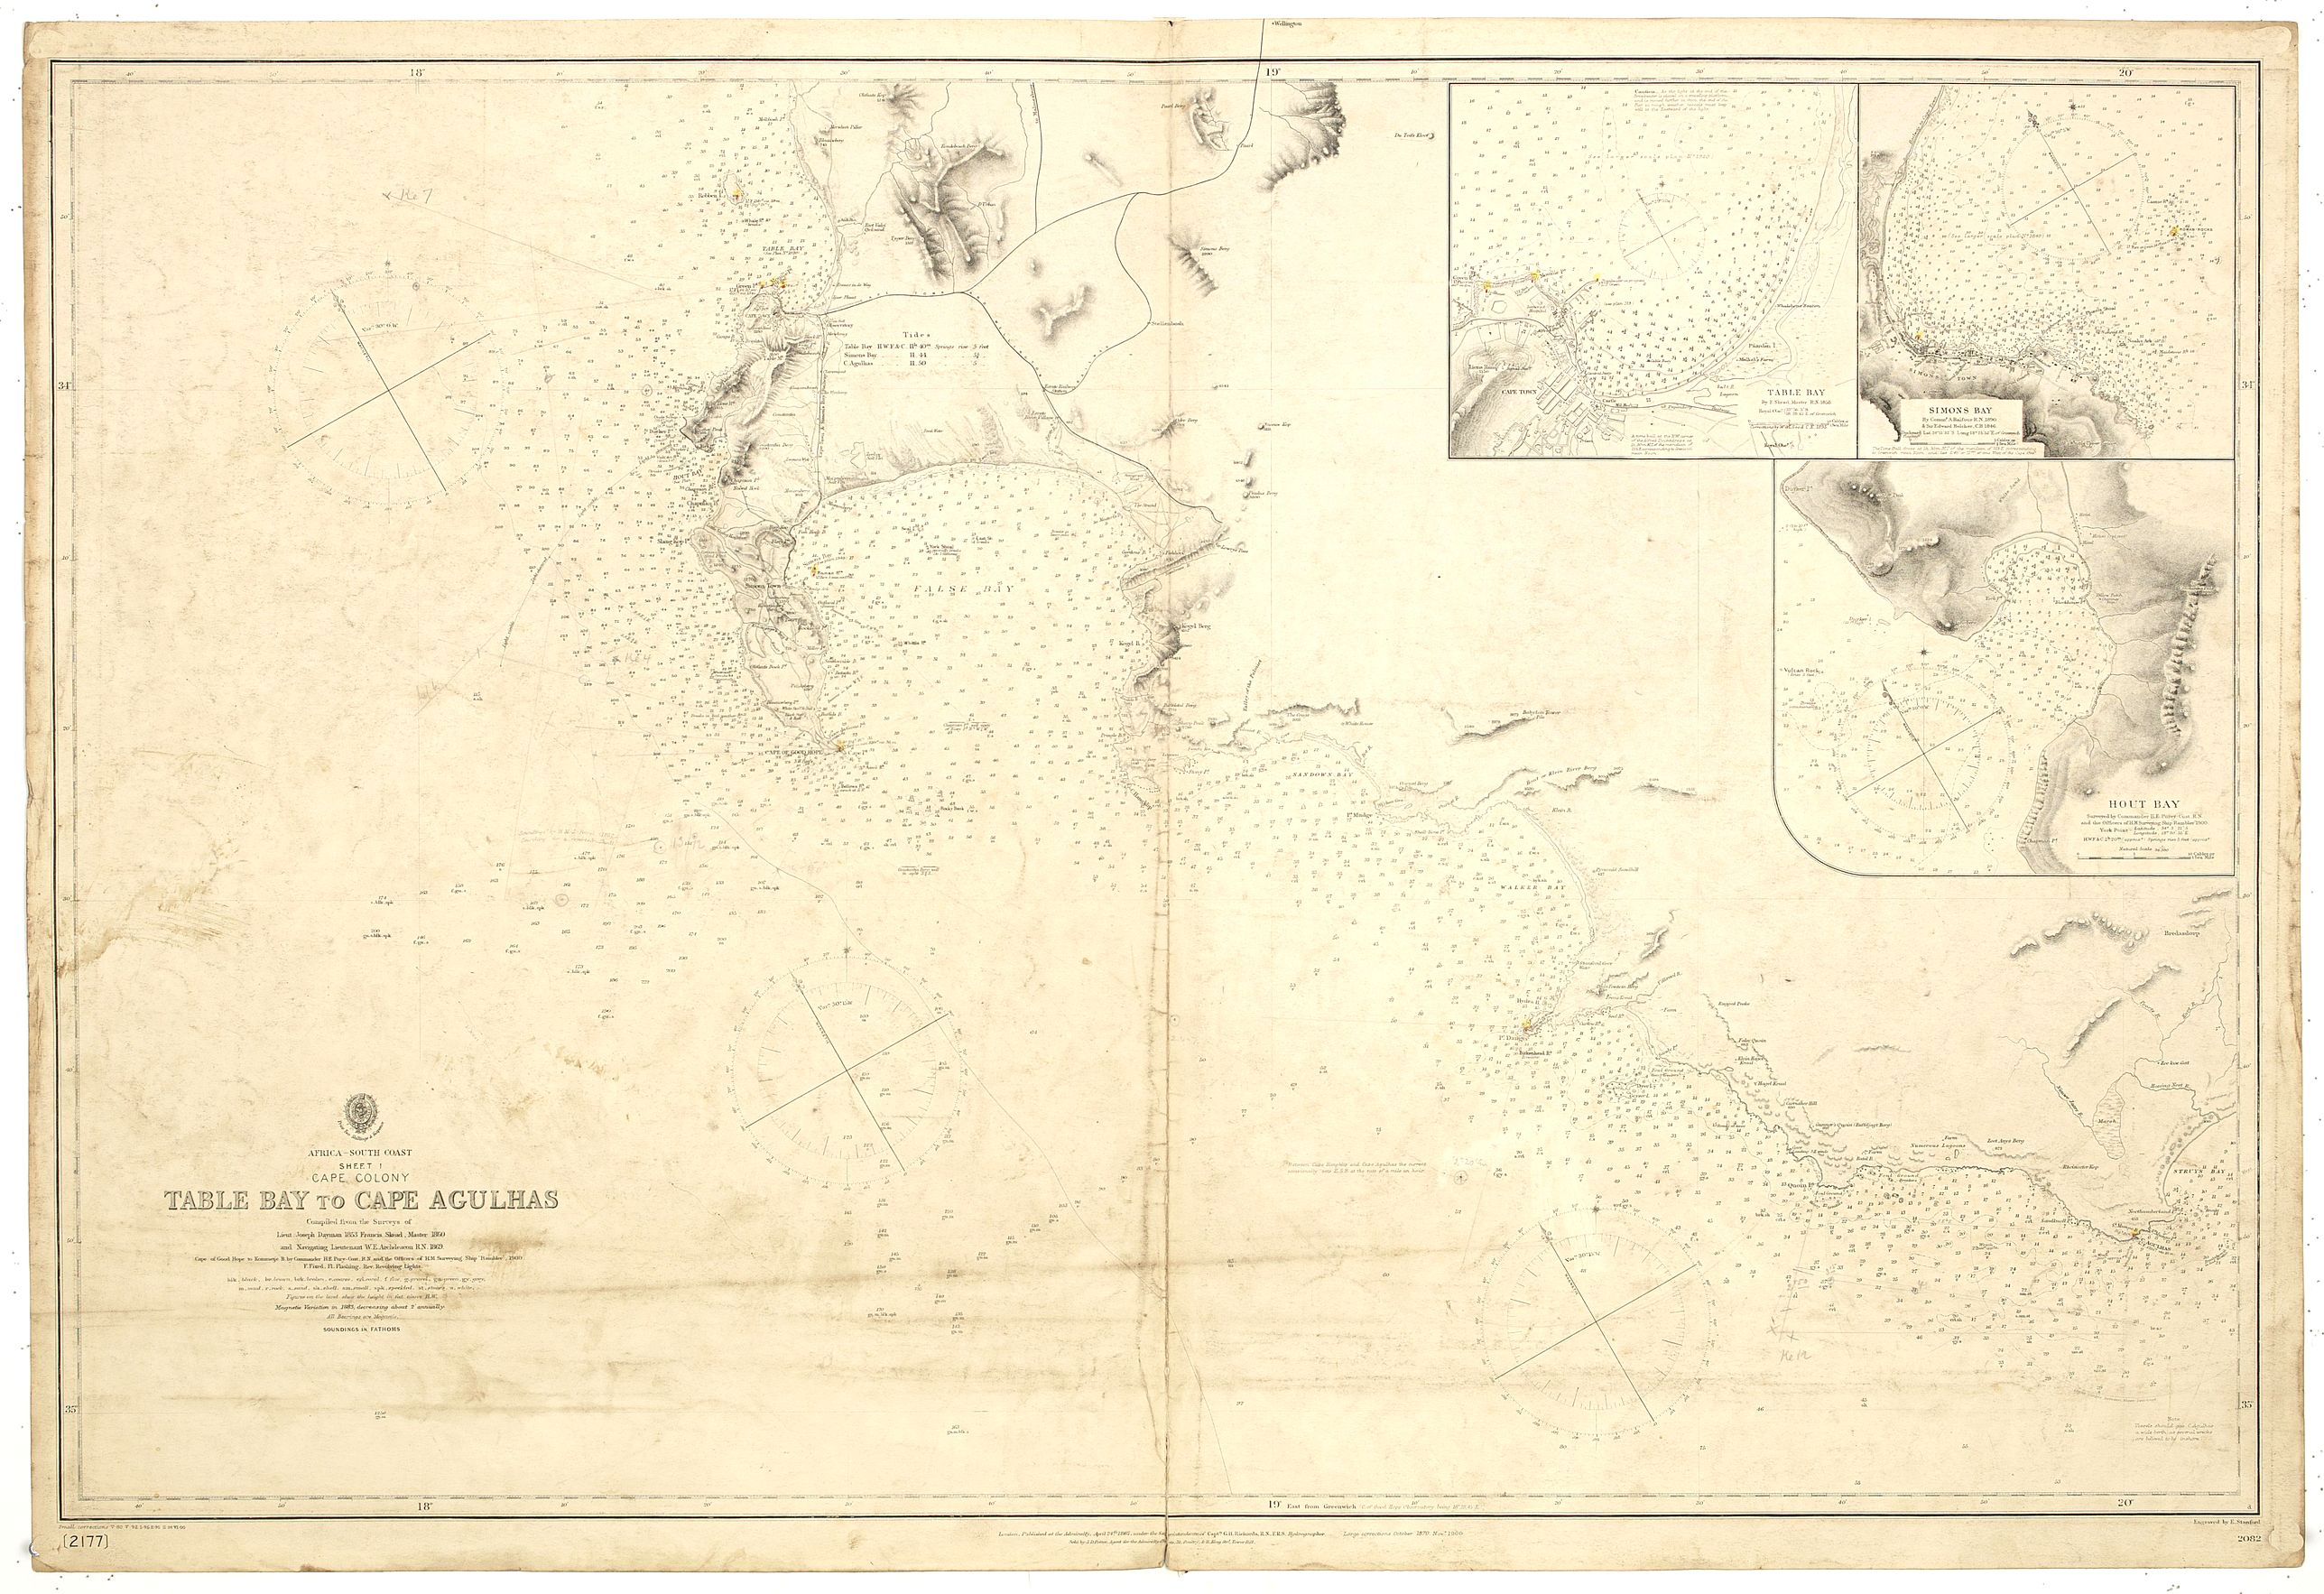 Africa - south coast sheet I Cape Colony Table Bay to Cape Agulhas compiled from the surveys of Lieut Joseph Dayman 1853 Francis Skead Master 1860 and Navigating Lieutenant W E Archdeacon RN 1869... Purey-Cust RN... Rambler 1900.